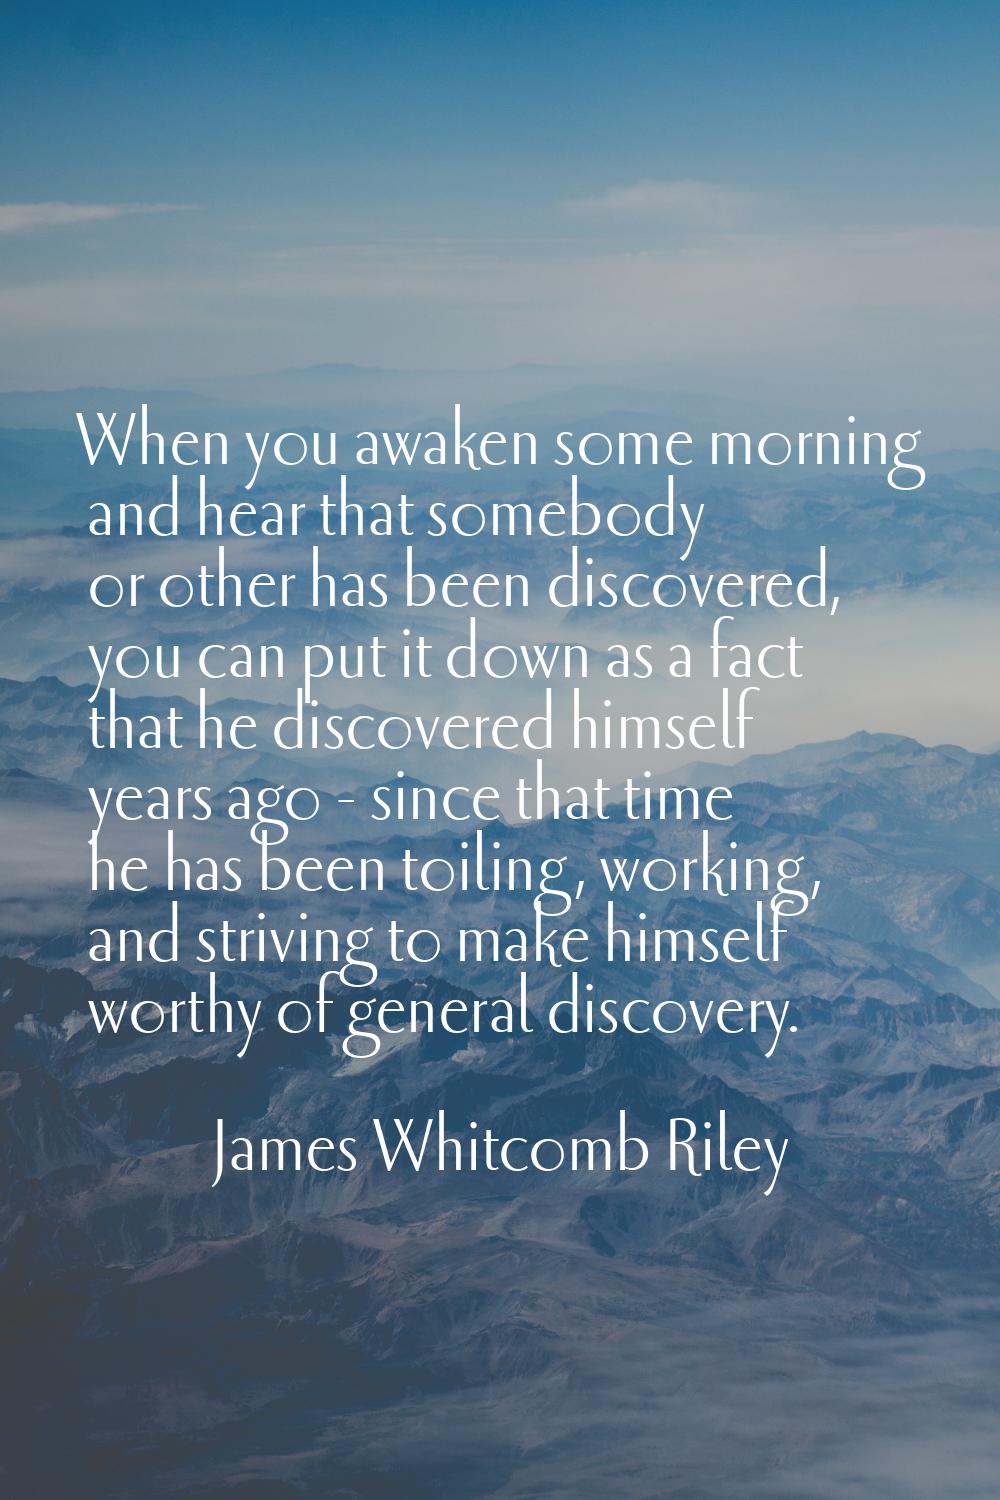 When you awaken some morning and hear that somebody or other has been discovered, you can put it do